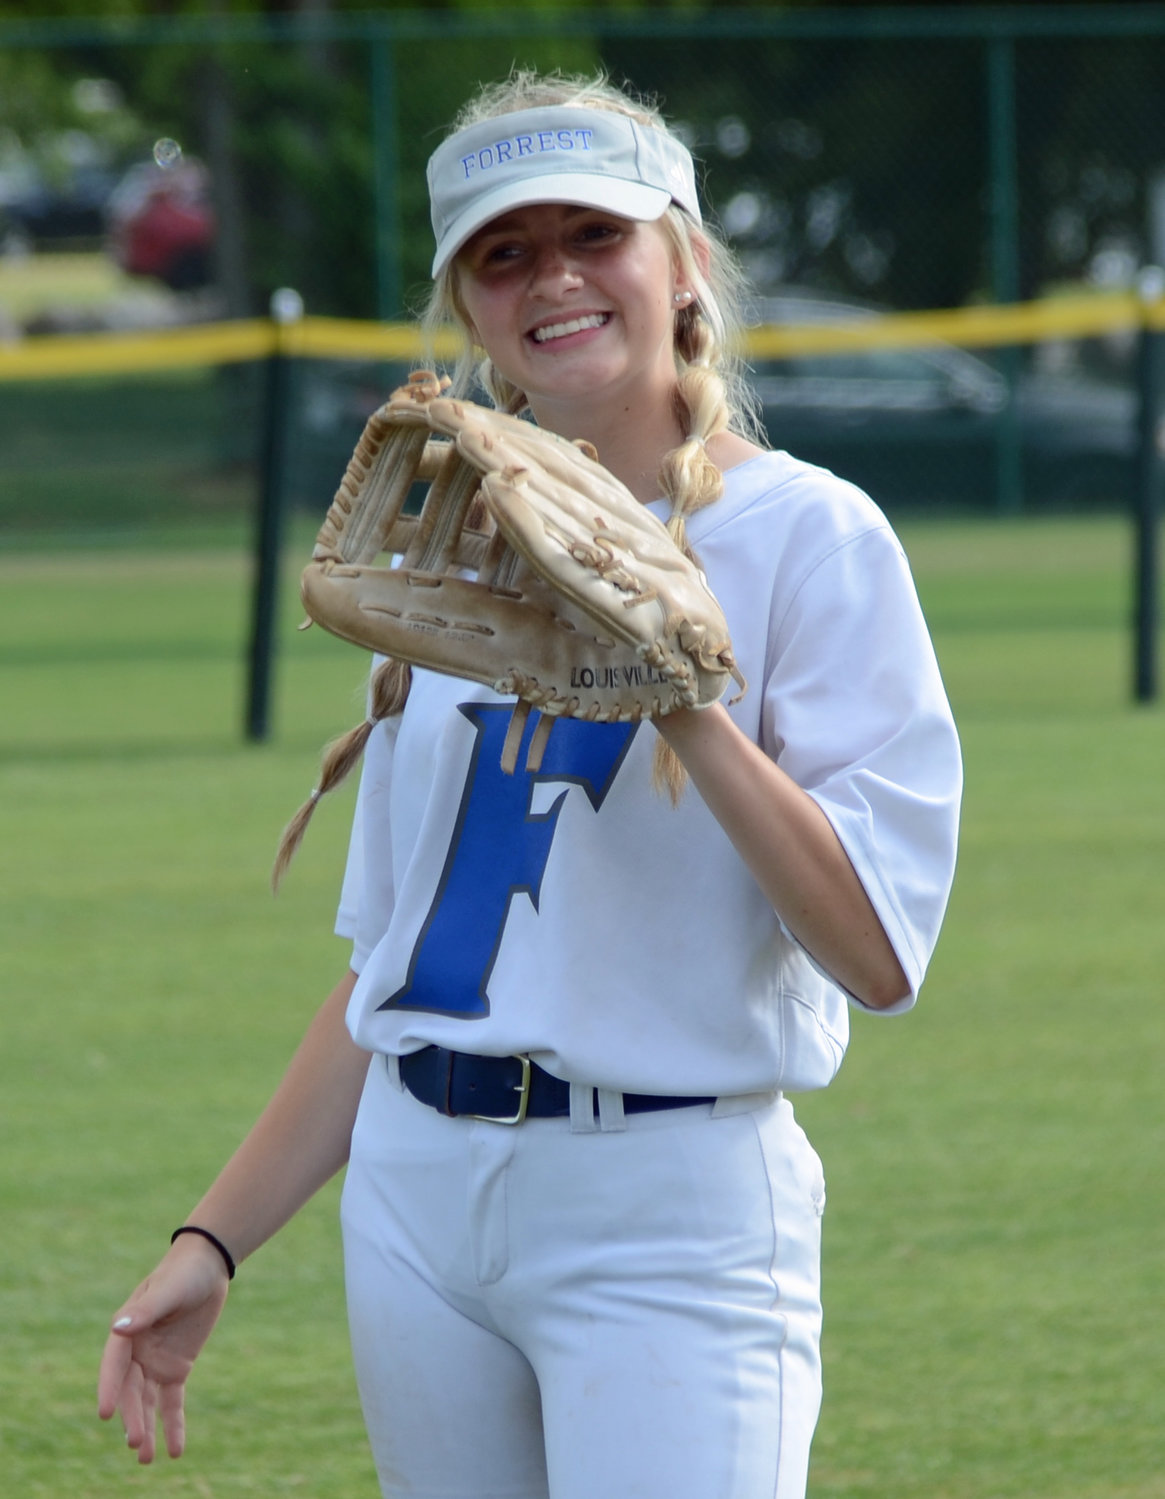 Young players like eighth-grader Karson Mihalek are the future of the Forrest softball program that has appeared in 19 state tournaments, winning four of them and finishing as runners-up five times.